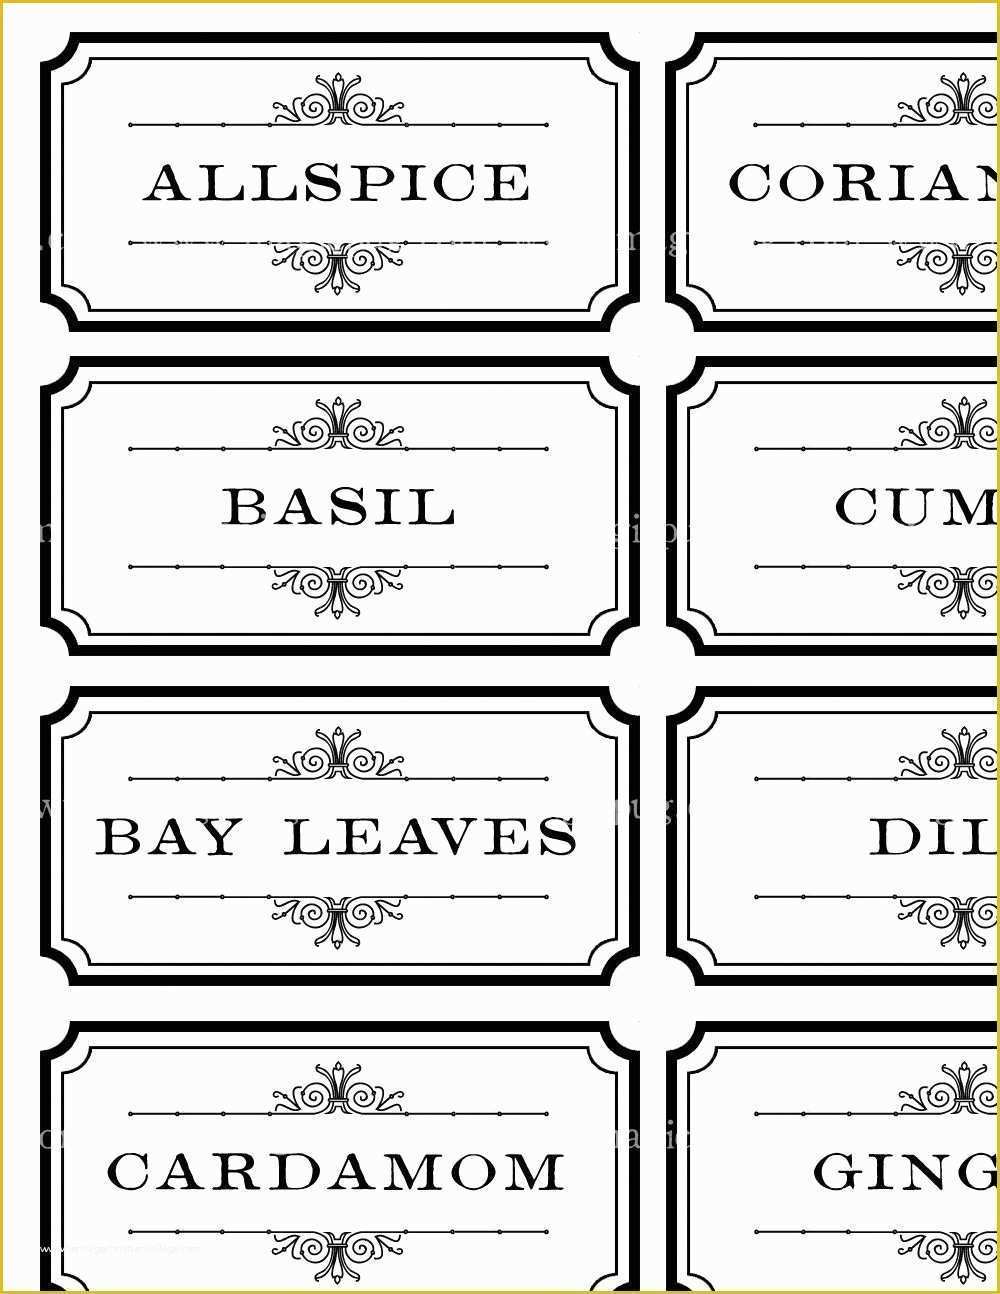 spice-jar-label-template-free-of-black-and-white-spice-and-herb-labels